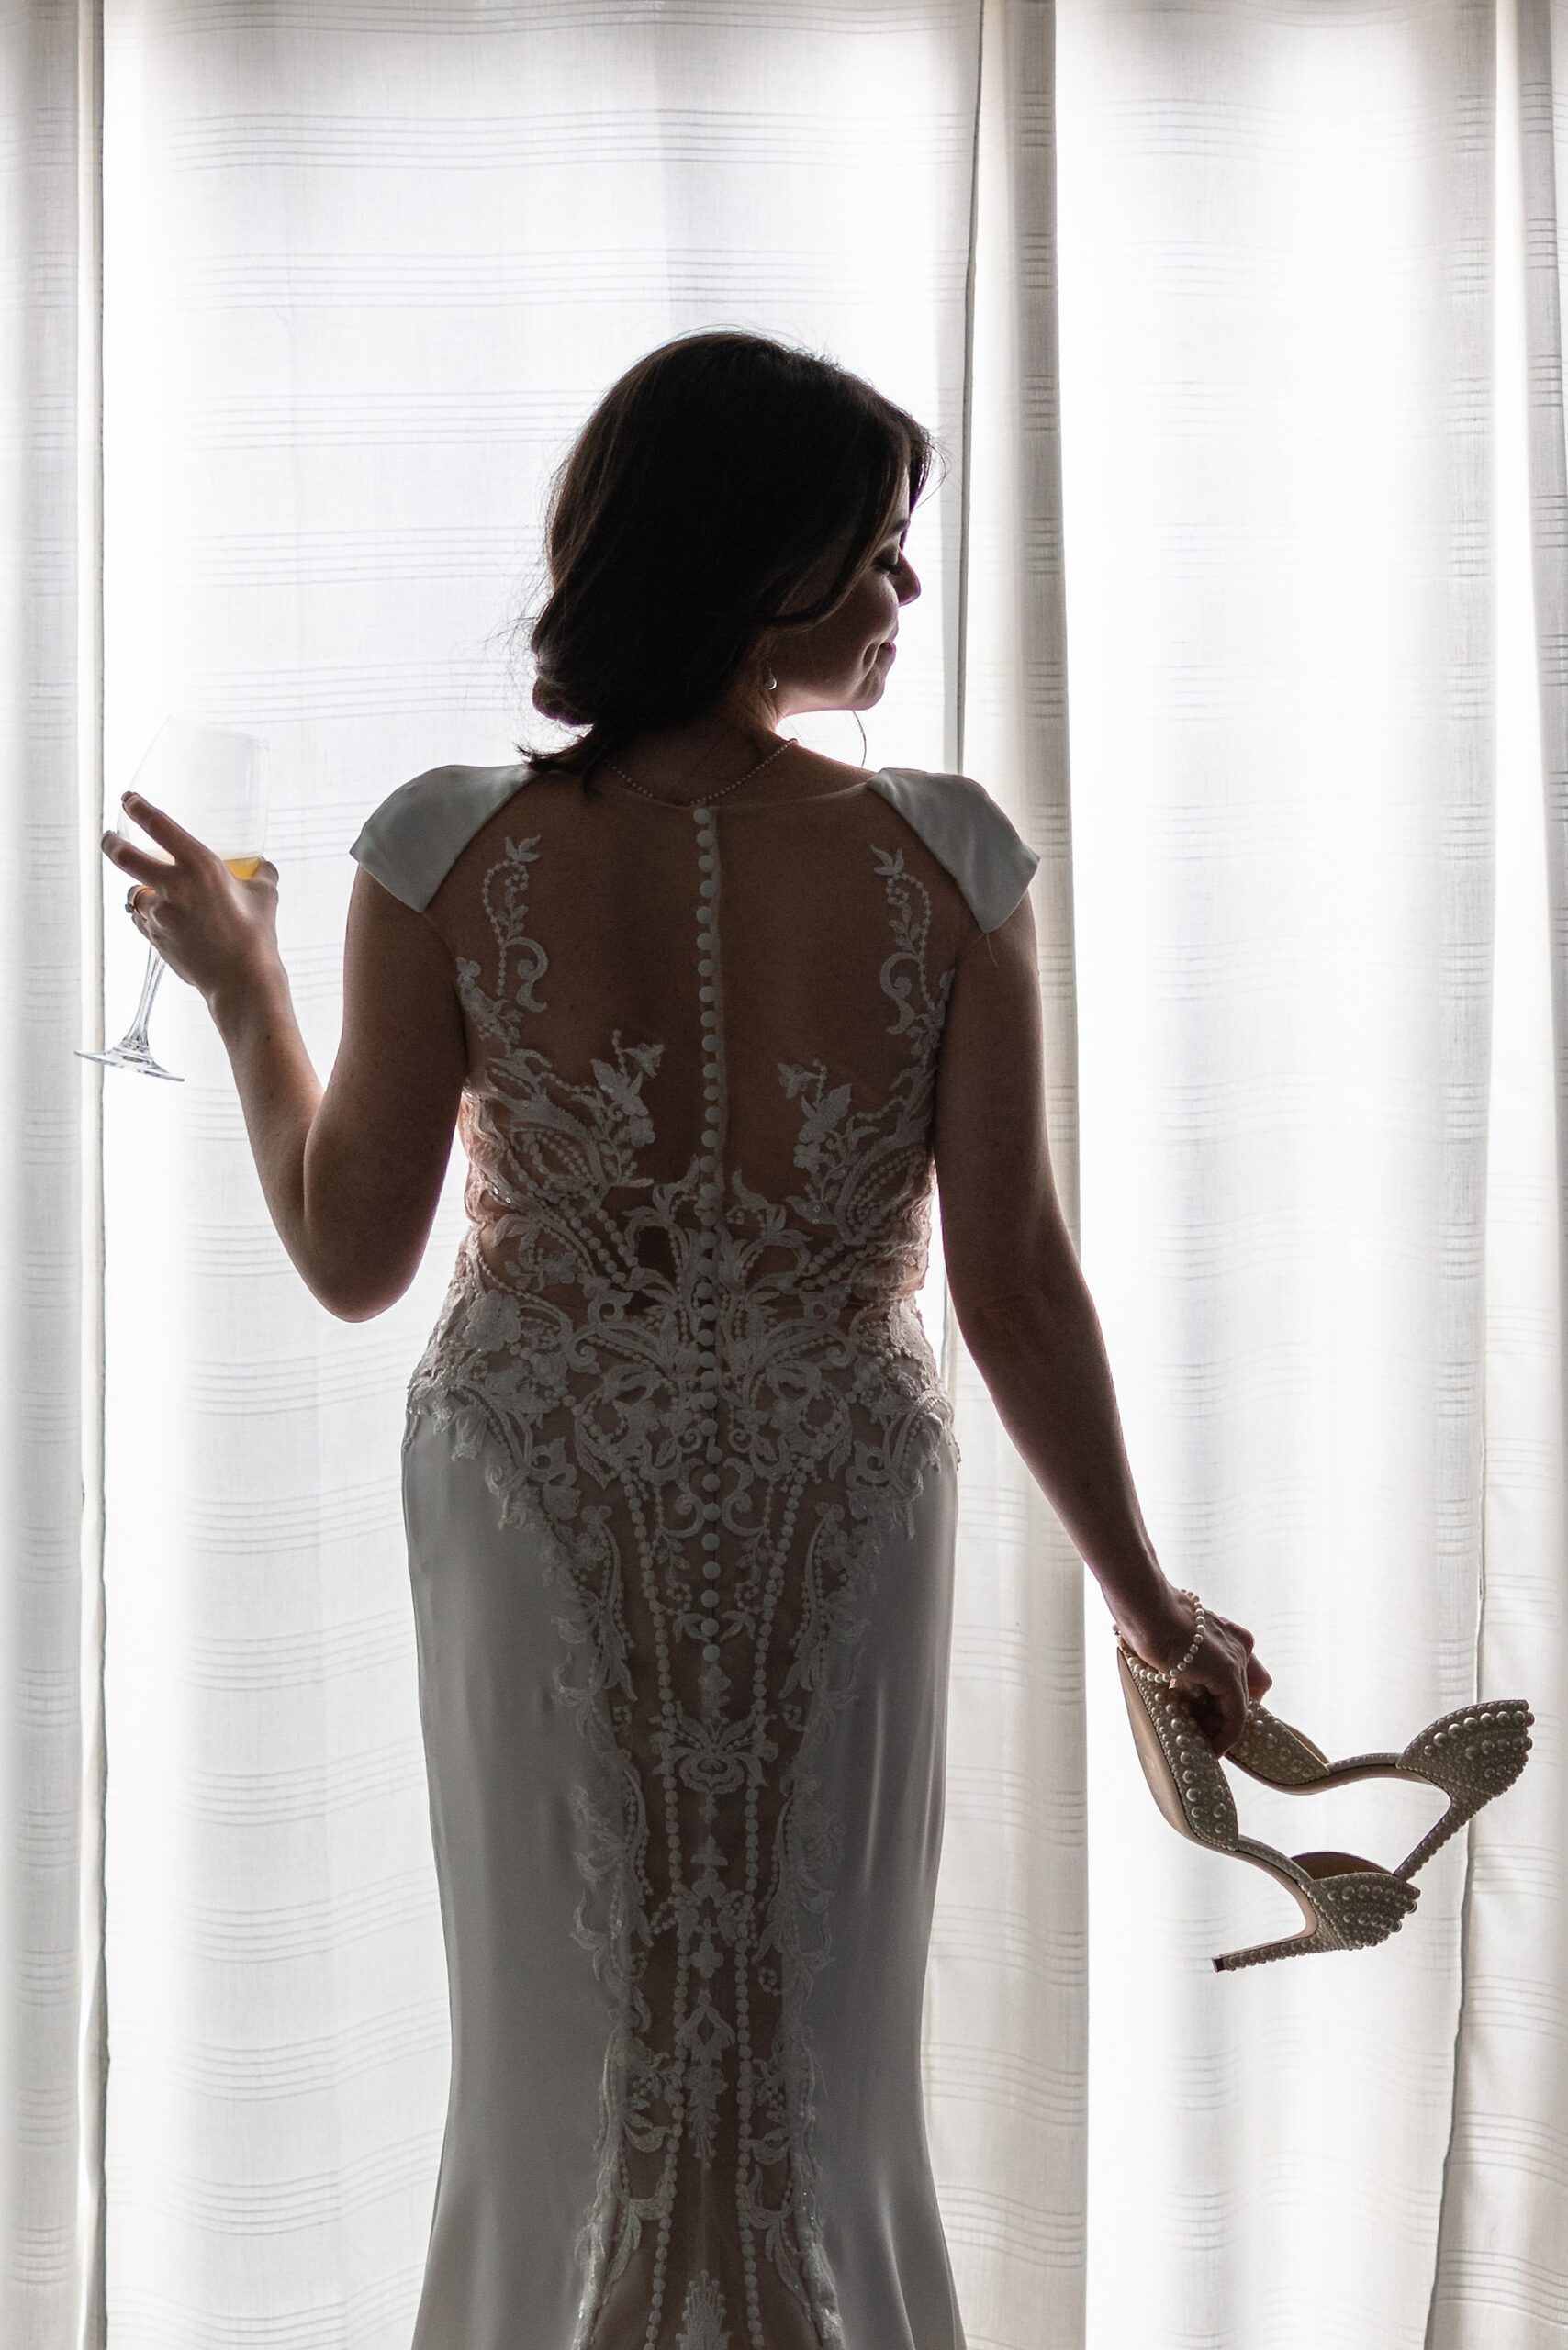 A bride stands in a window showing off her elaborate lace embroidery and holding a wine glass and shoes